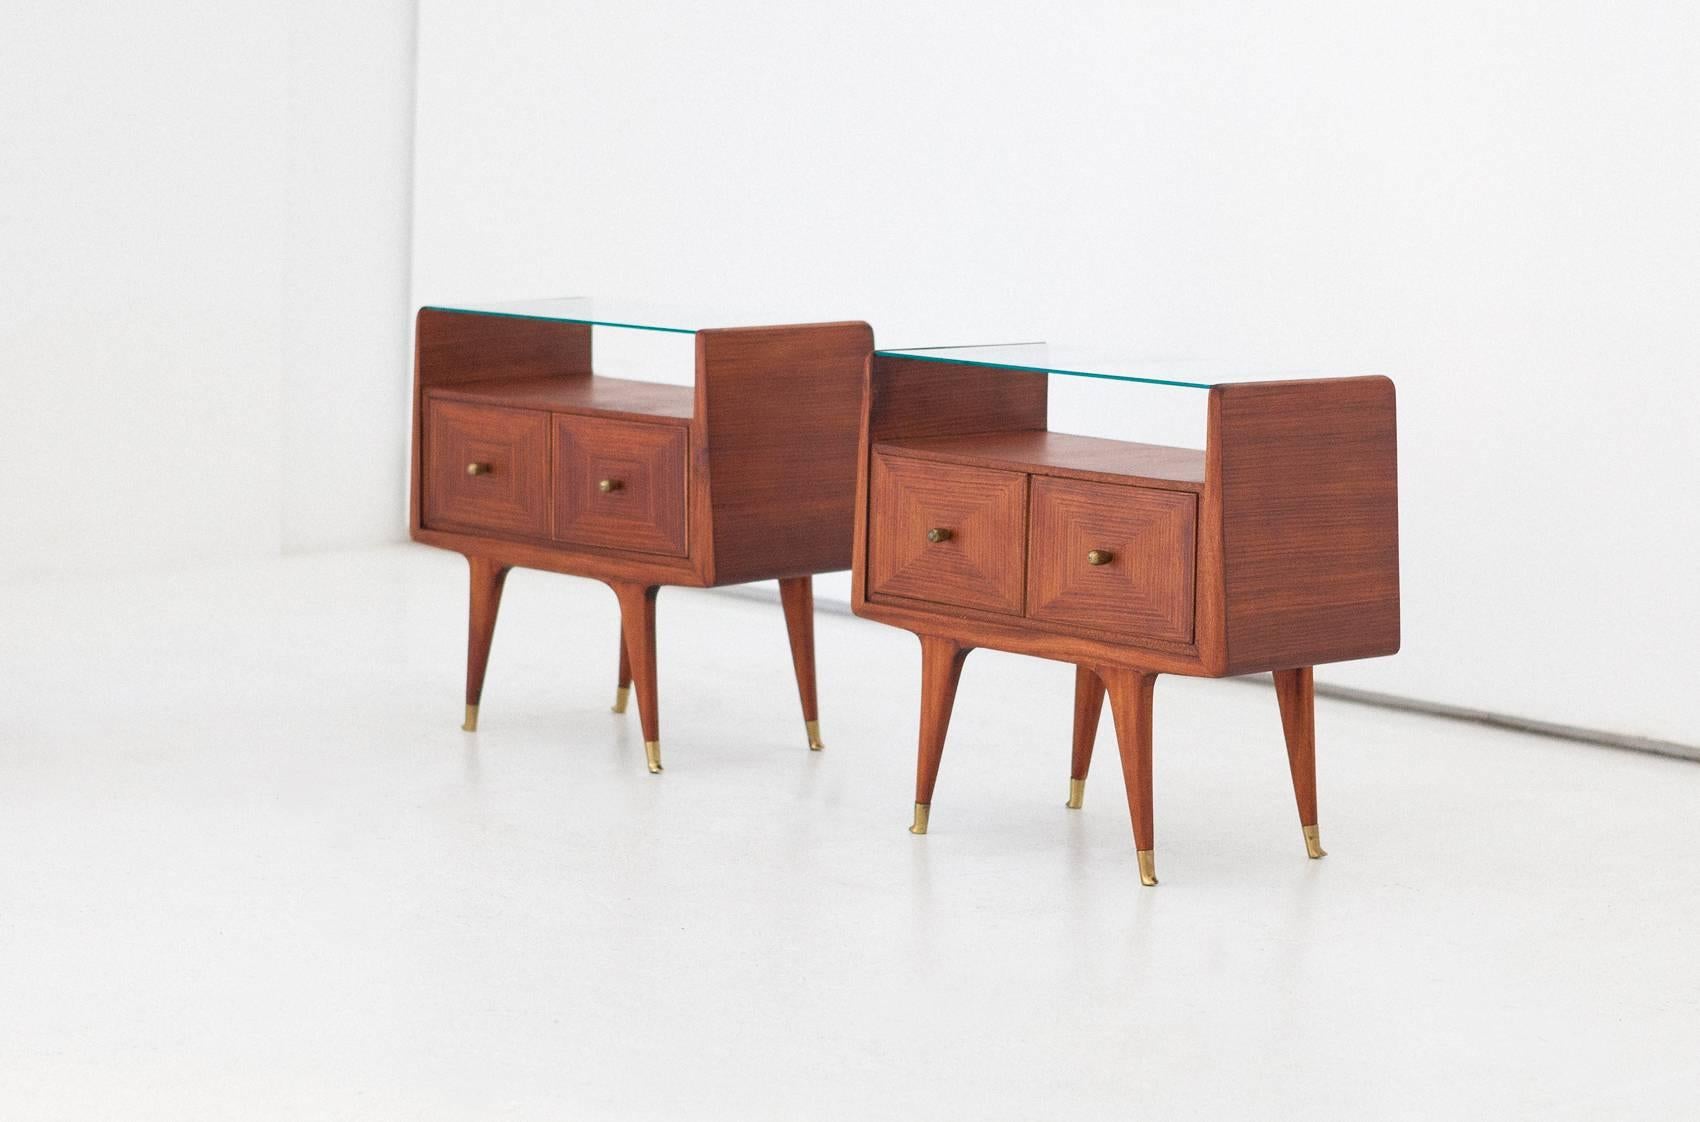 Pair of Italian modern bedside tables from 1950s
Mahogany wood with glass plane and brass handles and feet
Fully restored. Sanded and finished only with oil.